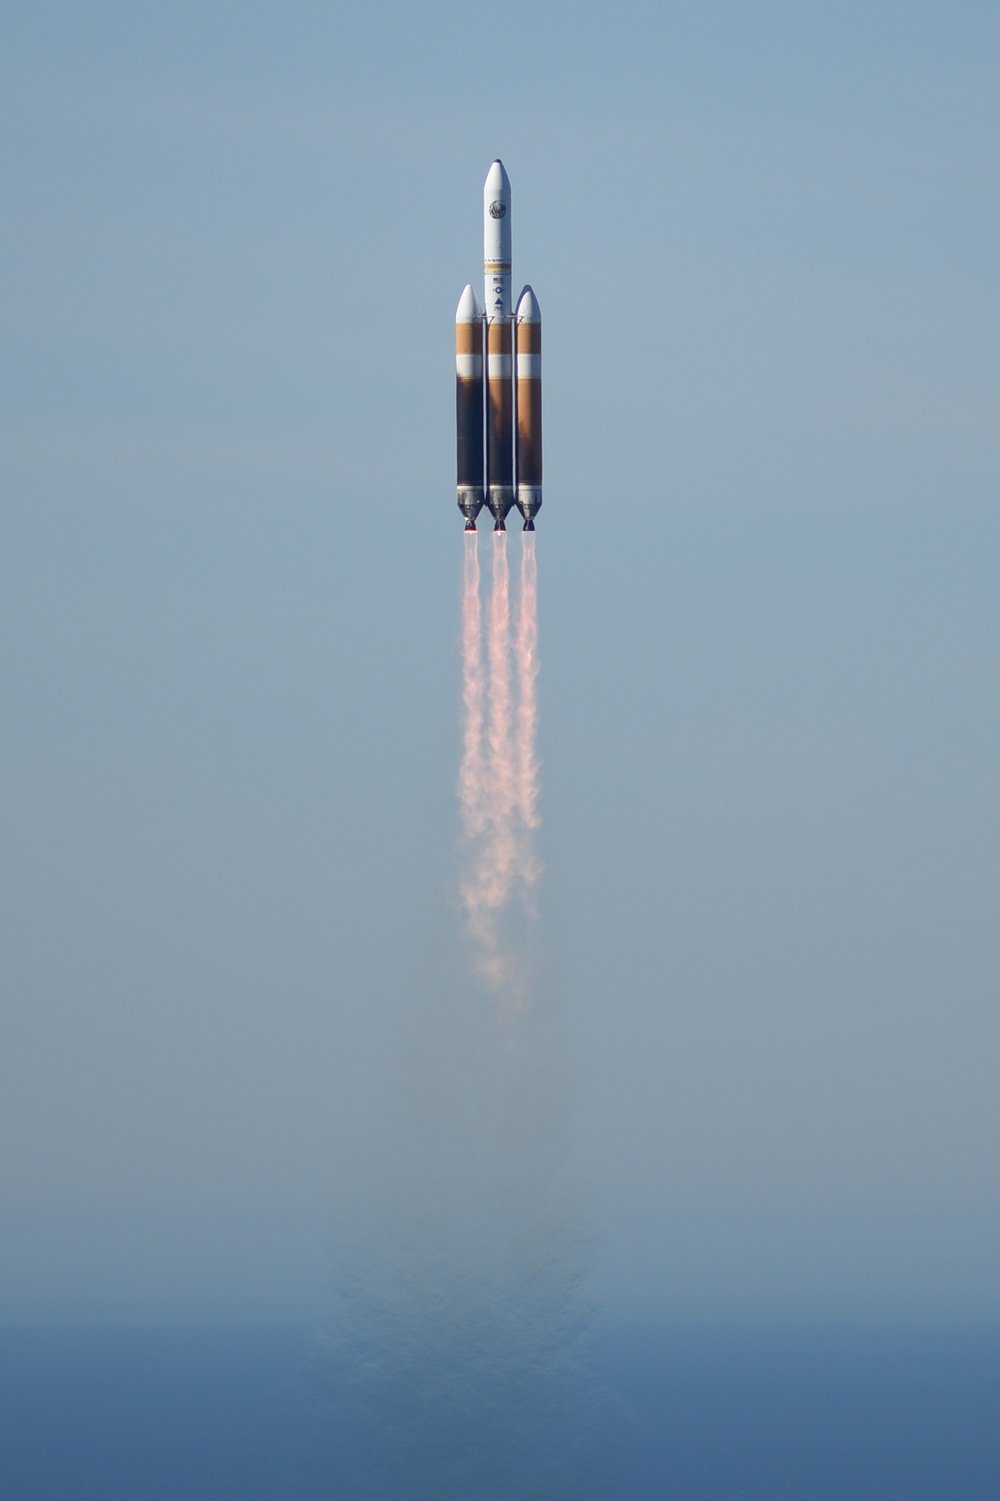 Delta IV Heavy NROL-71 successfully launched